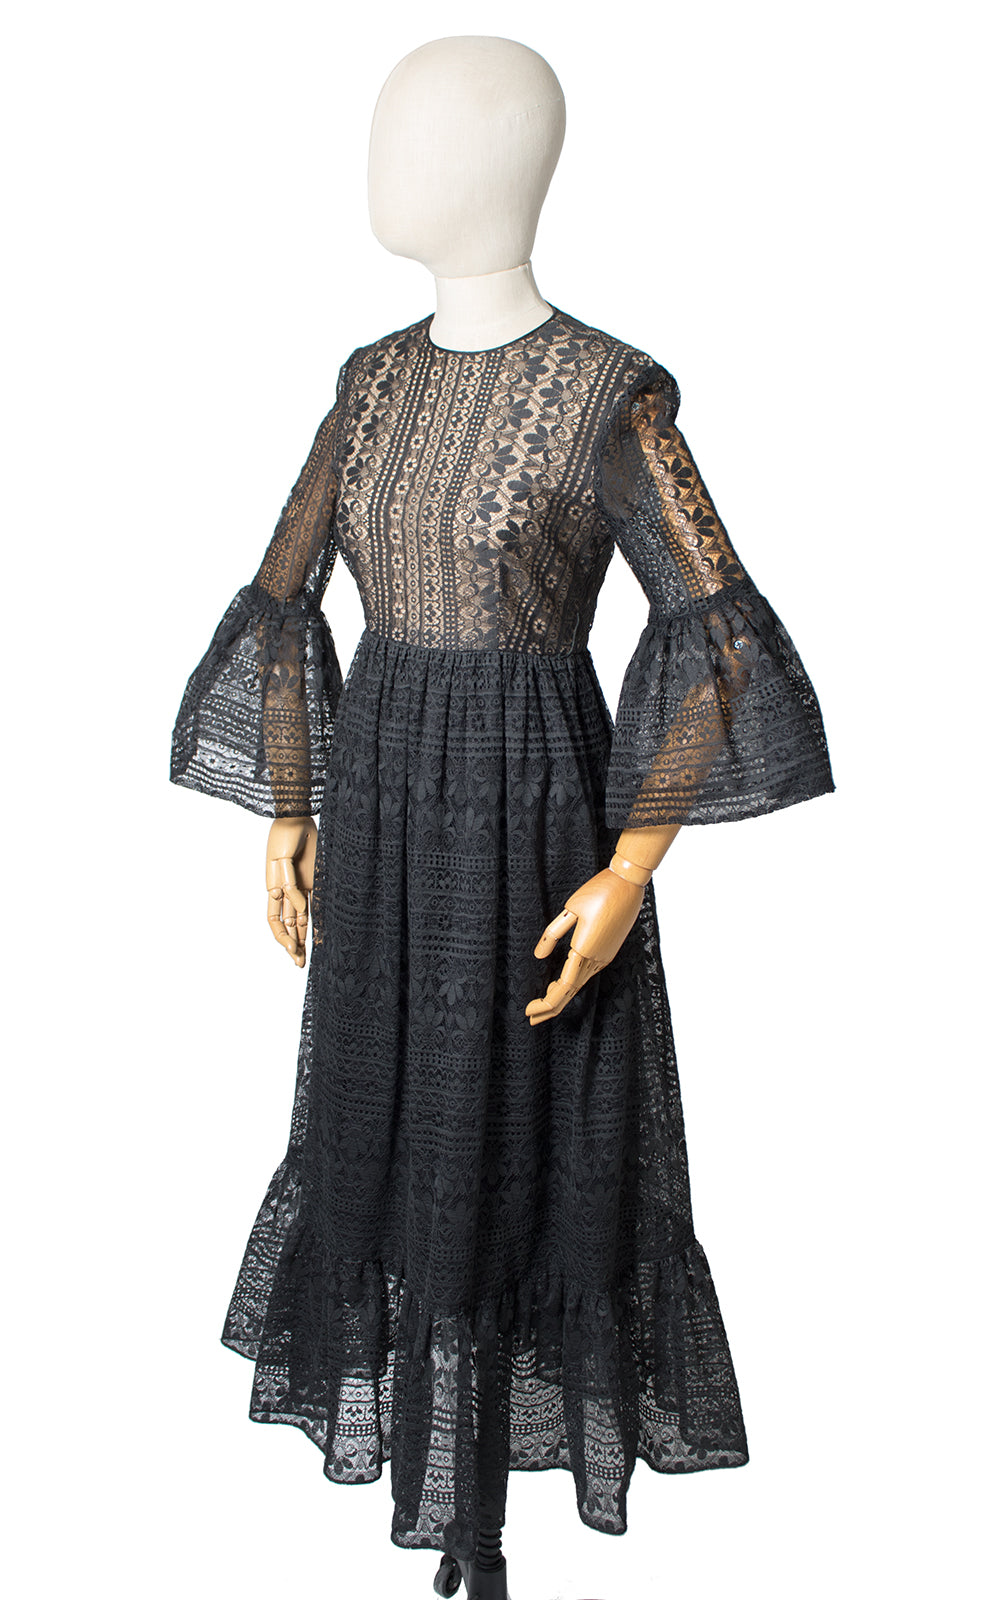 1960s Nude Illusion Lace Bell Sleeve Dress